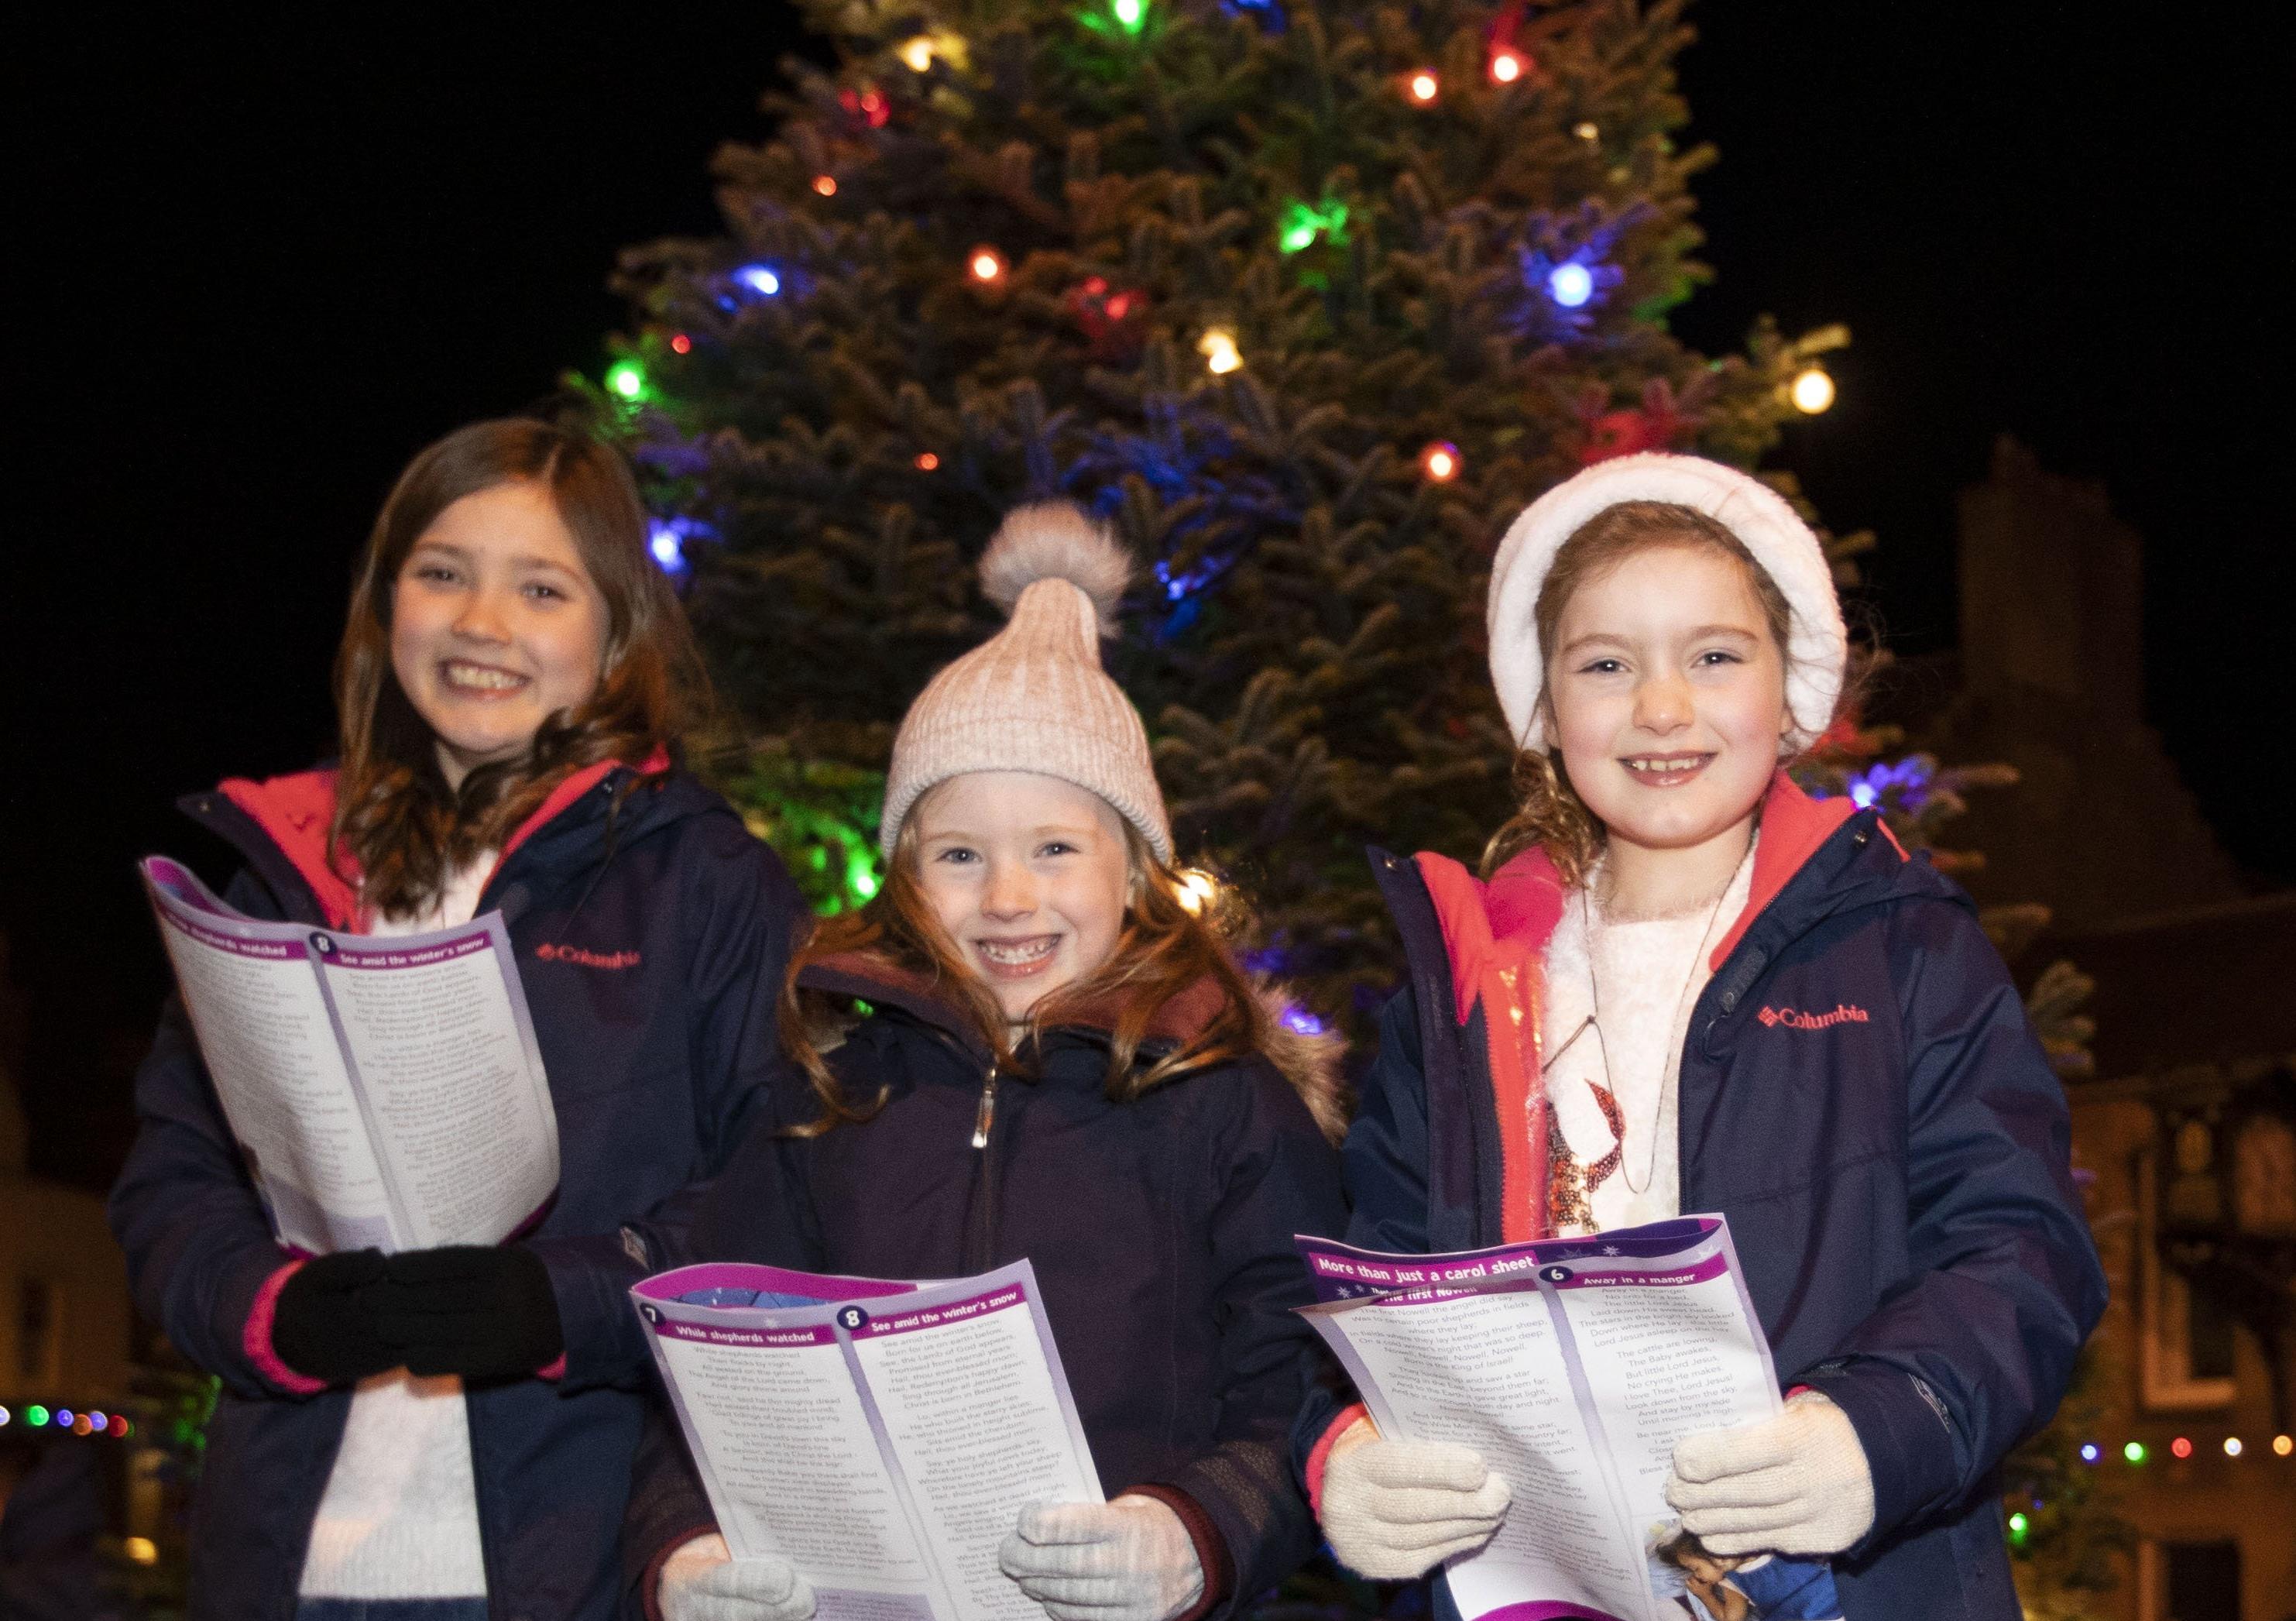 In pictures: Christmas carols ring out across Melrose | The Southern ...